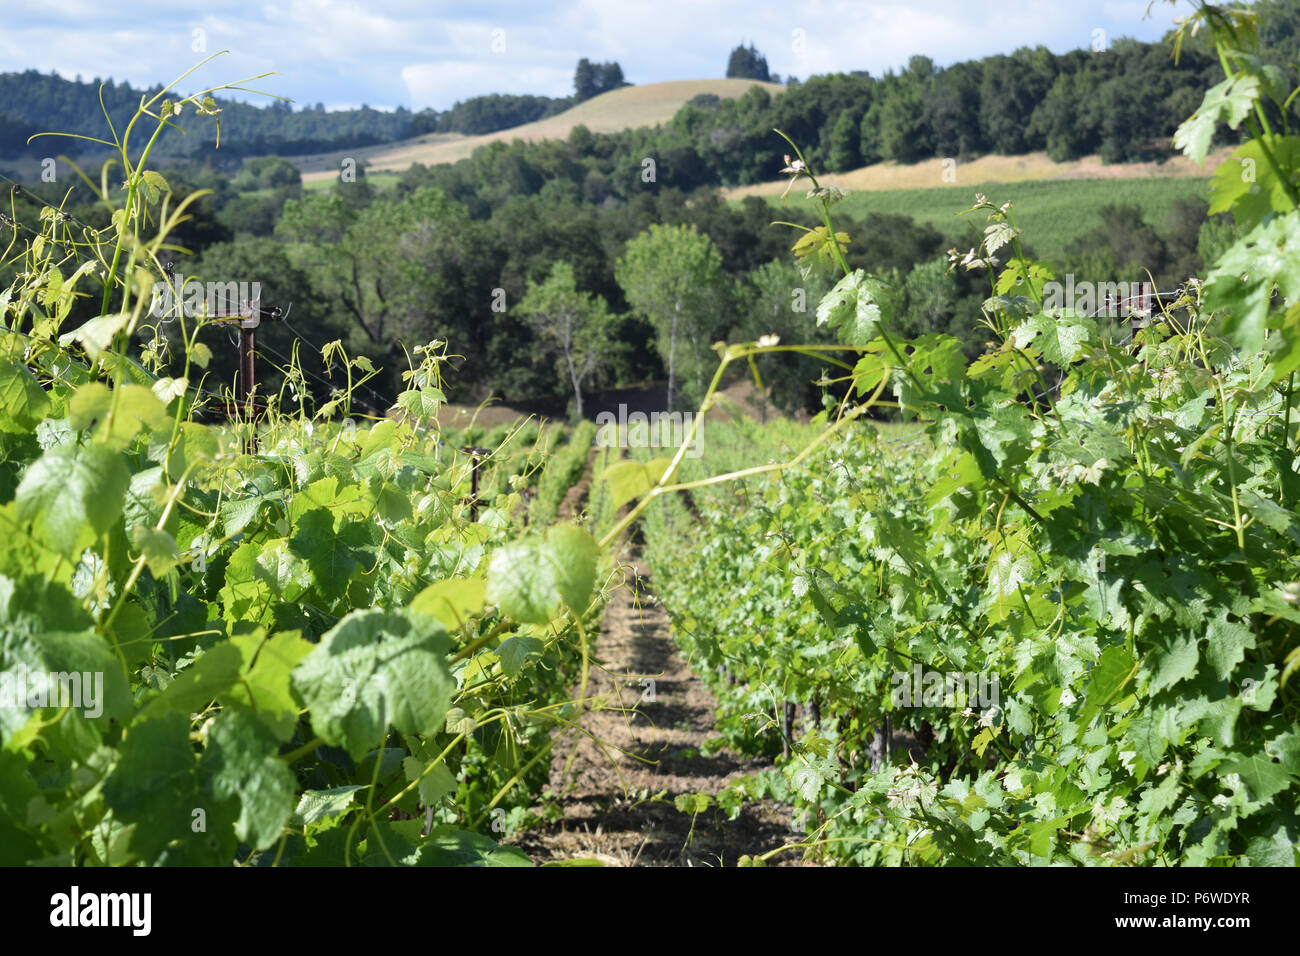 Rows of award-winning grapes on a Russian River Valley vineyard in Sonoma County, California Stock Photo